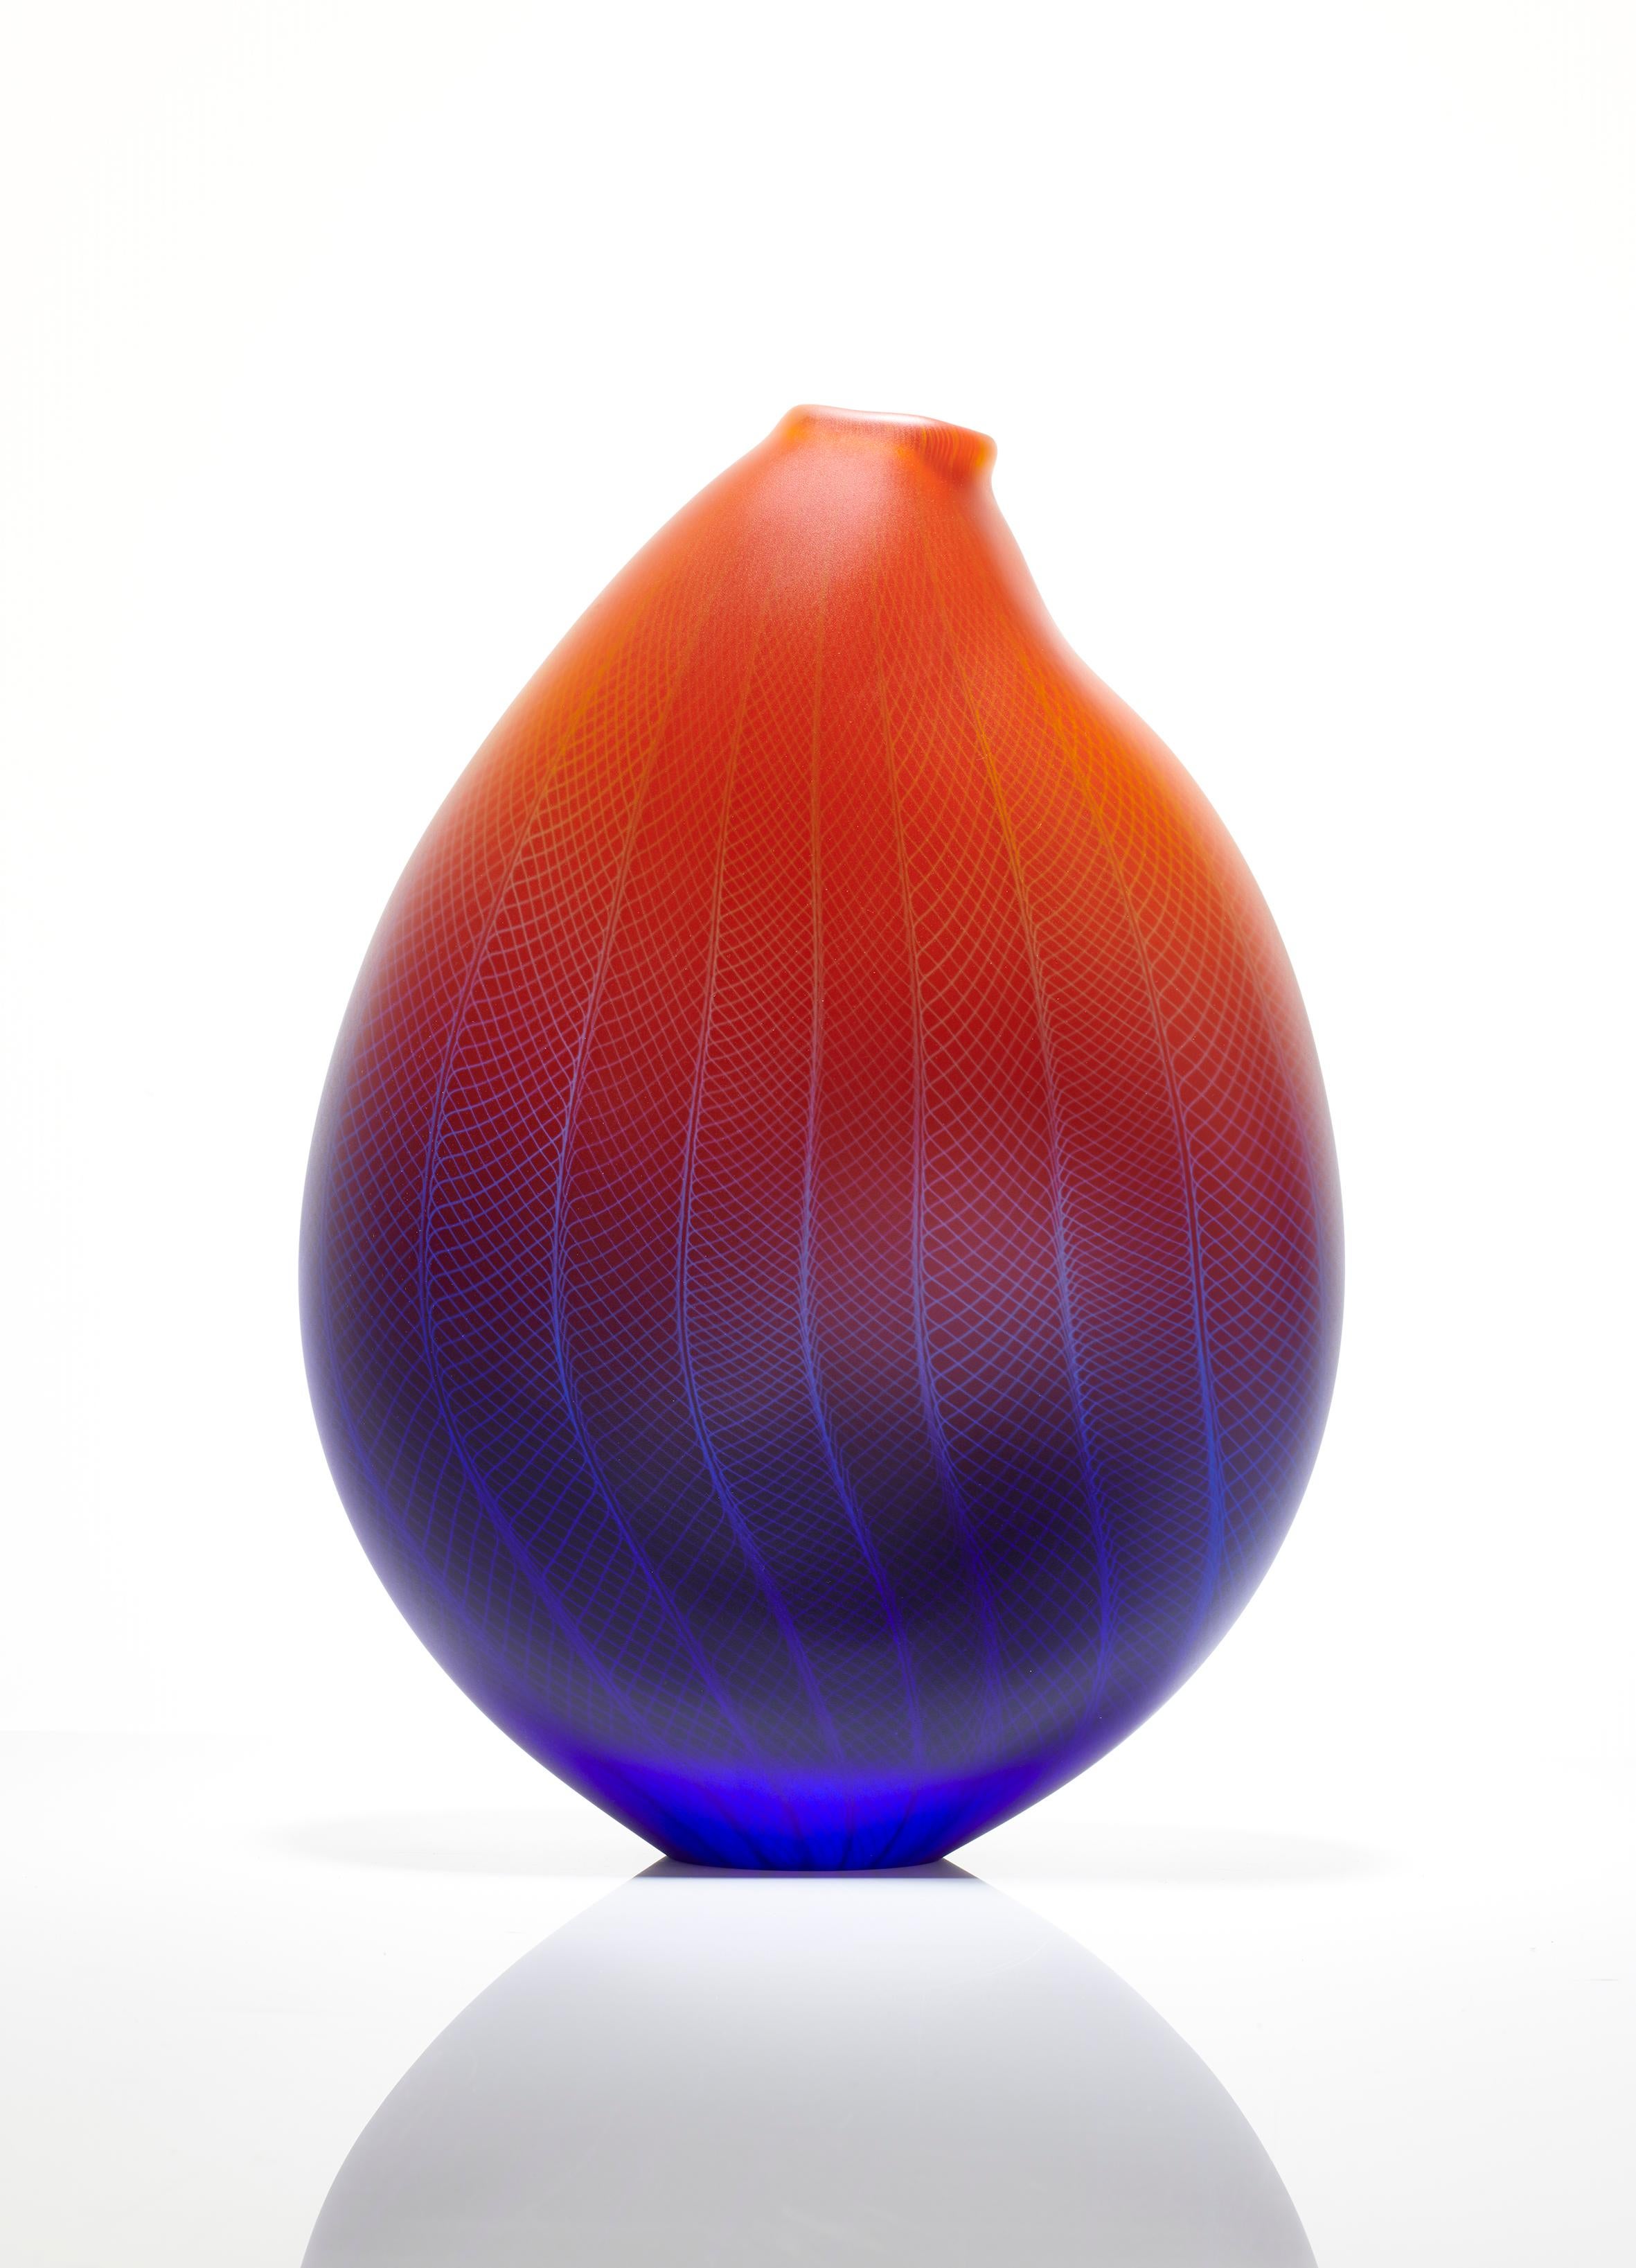 Hand-Crafted Polychromatic Interleave 005, a unique glass vessel in red & blue by Liam Reeves For Sale